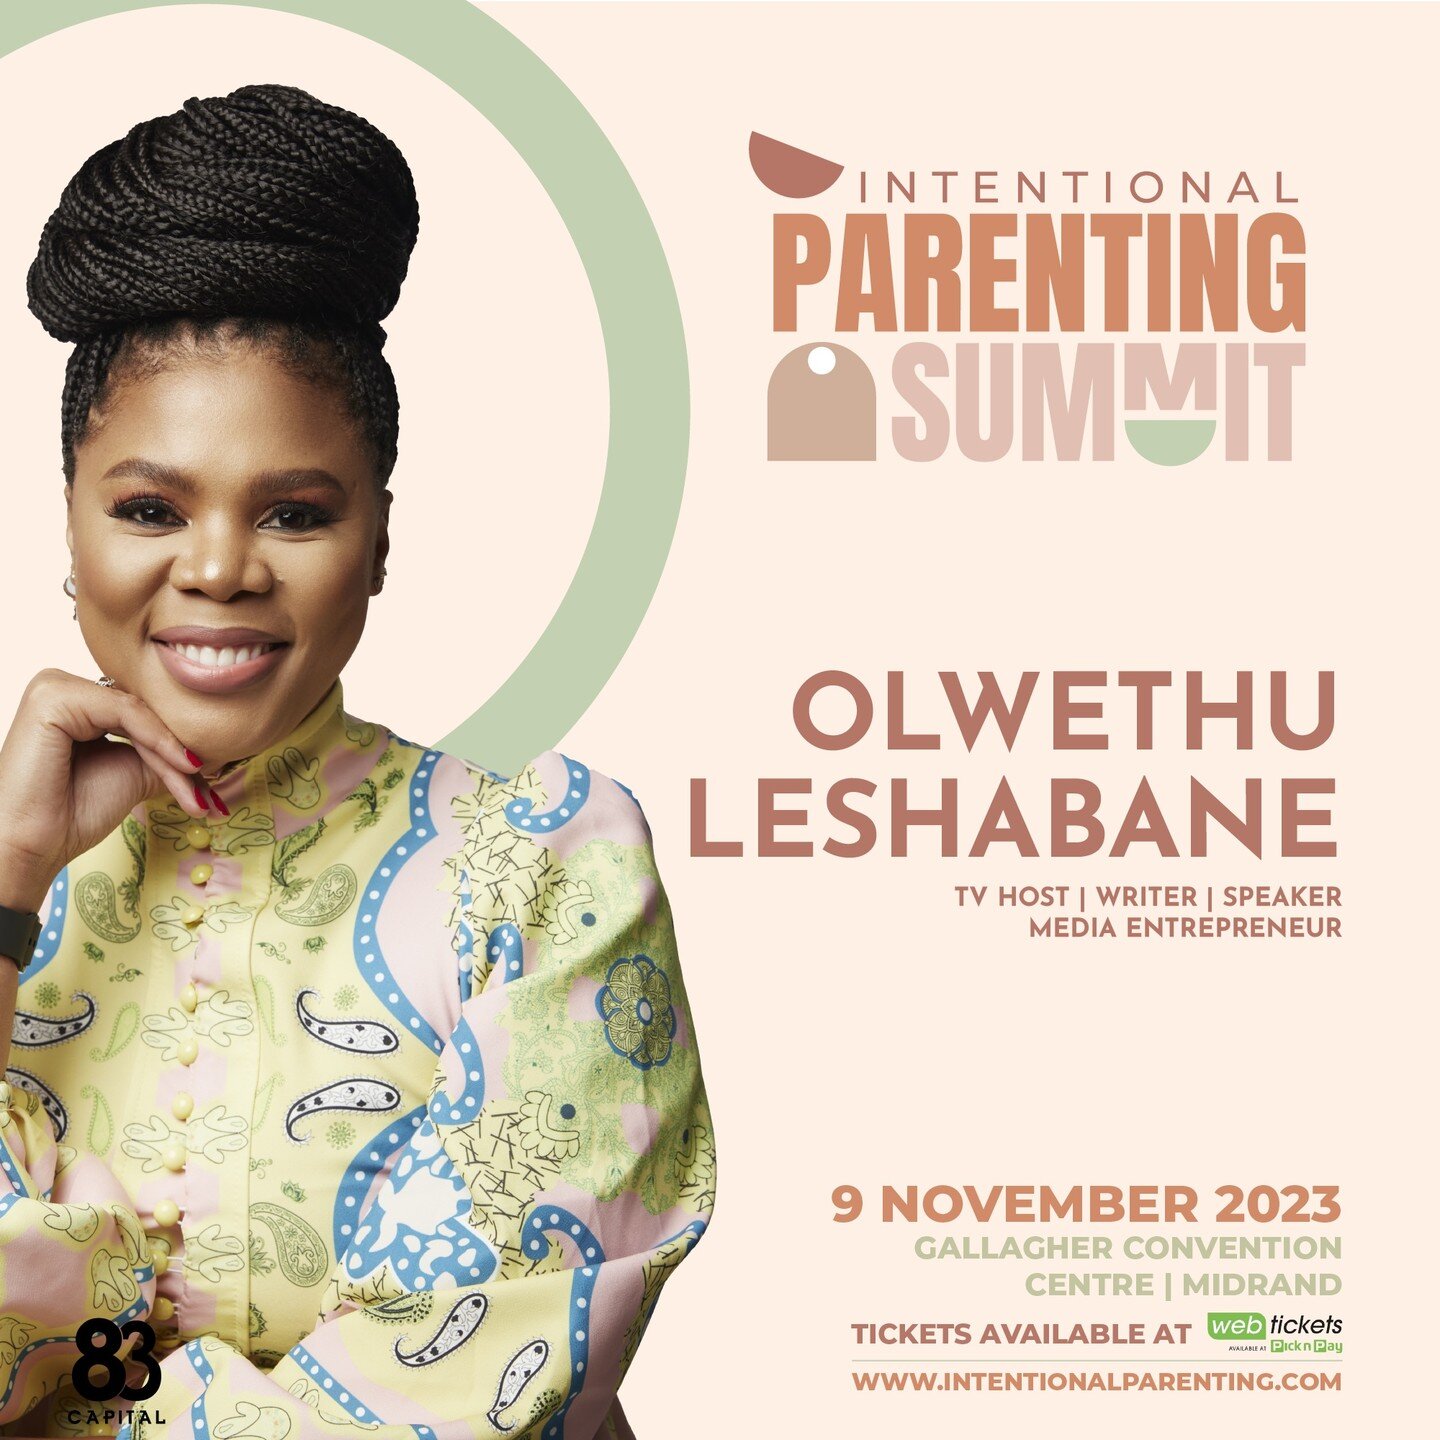 We are excited to announce that @olwe2lesh will be hosting the inaugural @intentionalparentingsa Summit on 9 November 2023 in Johannesburg.

Tonight Olwethu had such an insightful IG live conversation with IPS founder Bayanda Gumede about parenting s